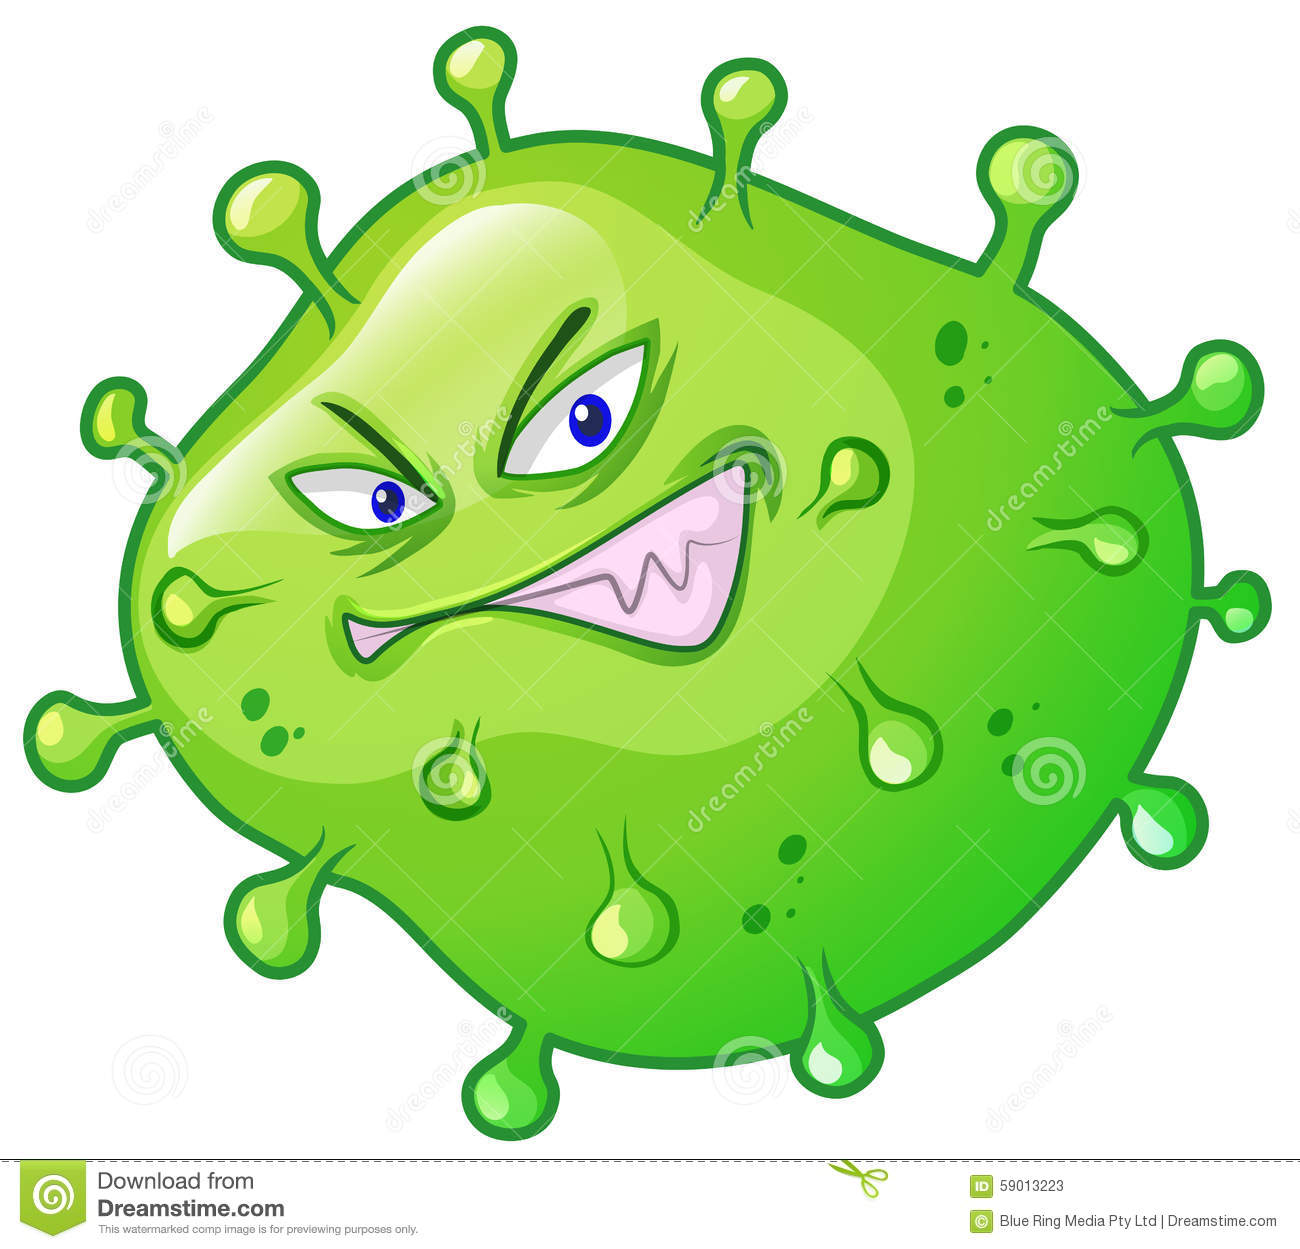 Bacteria clipart evil. Angry pencil and in